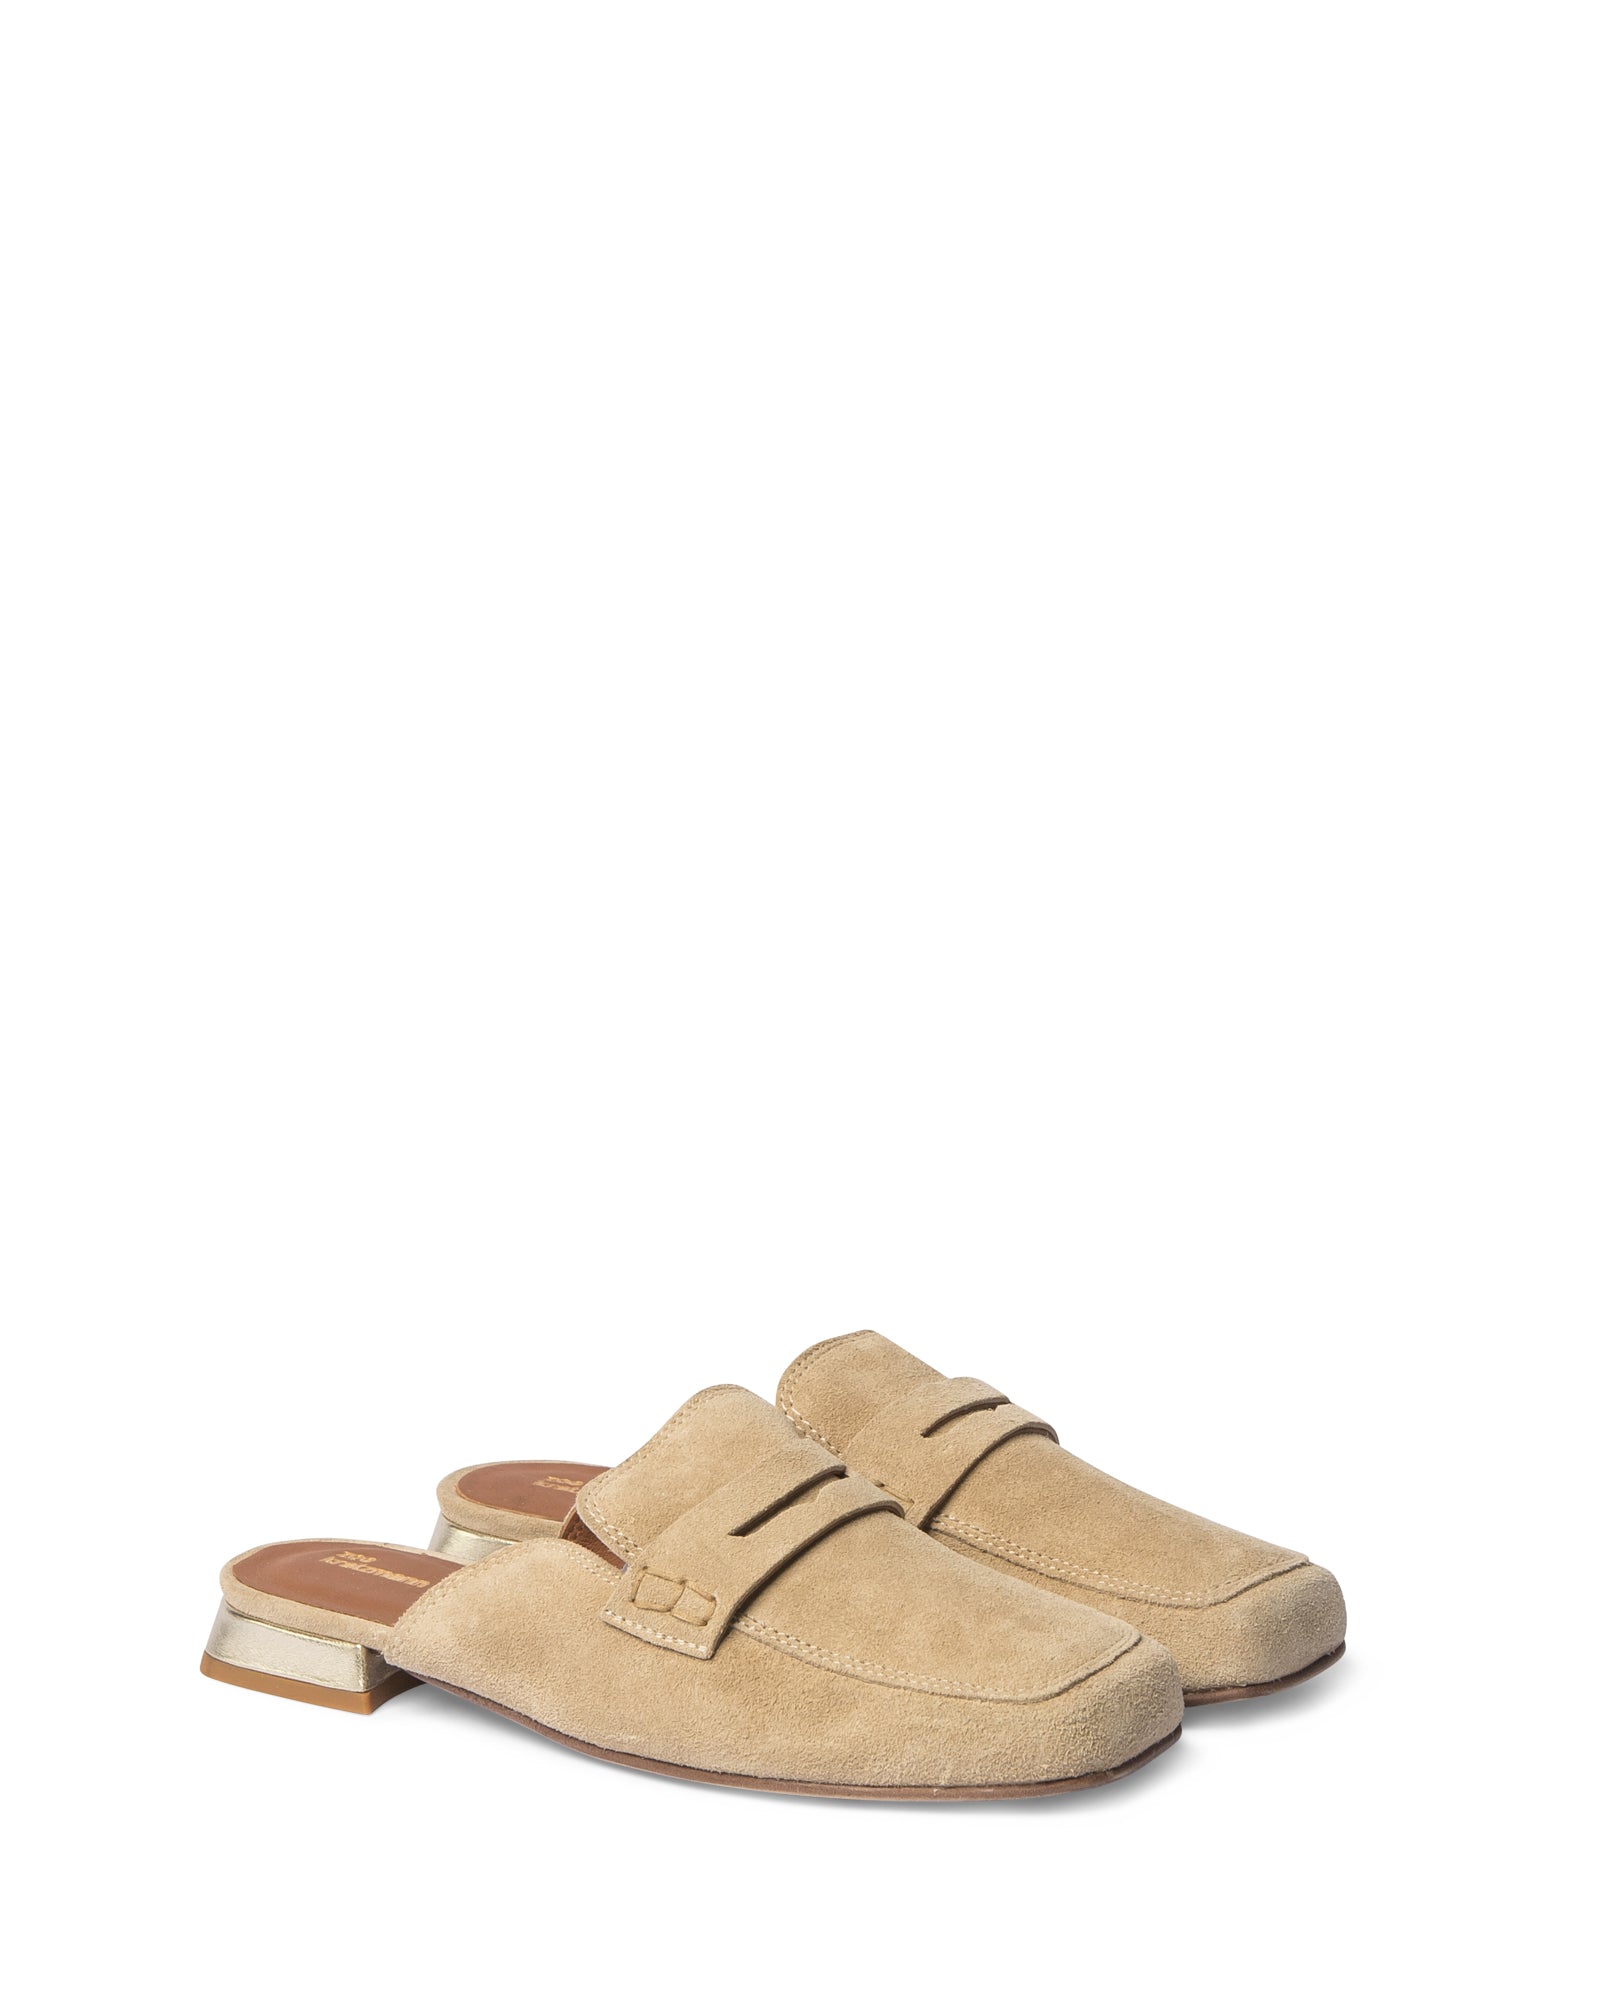 unlock loafer - fawn suede